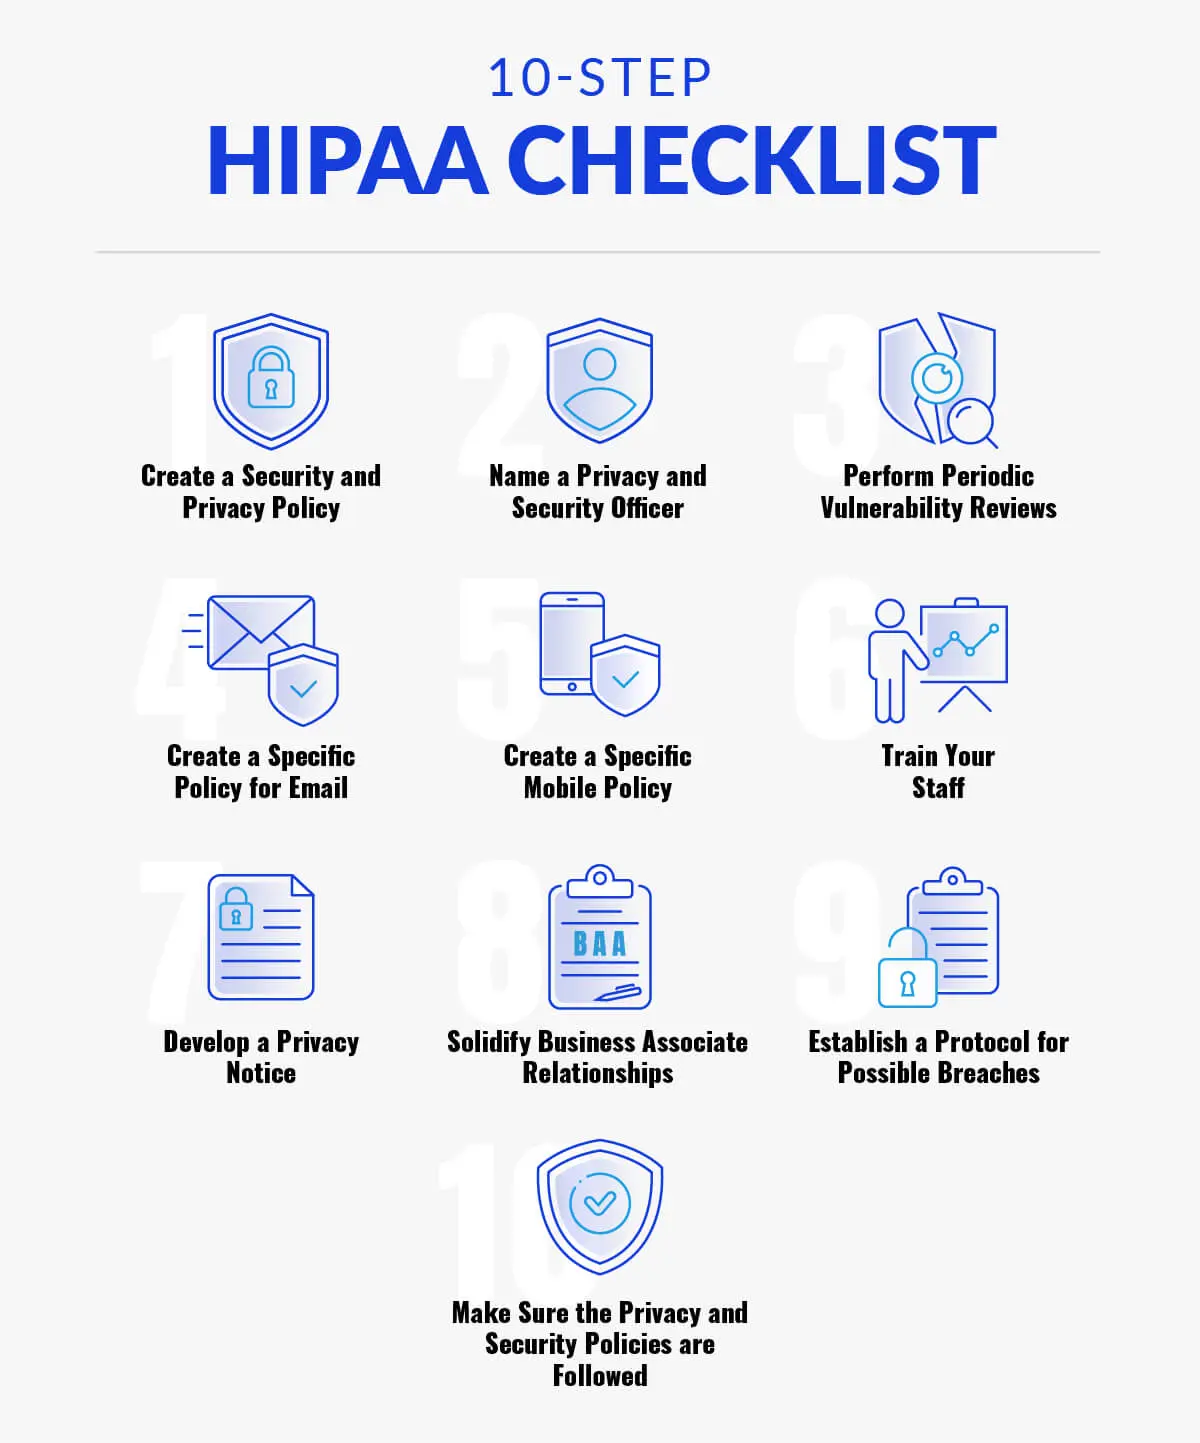 how to become a hipaa auditor - What is a HIPAA professional